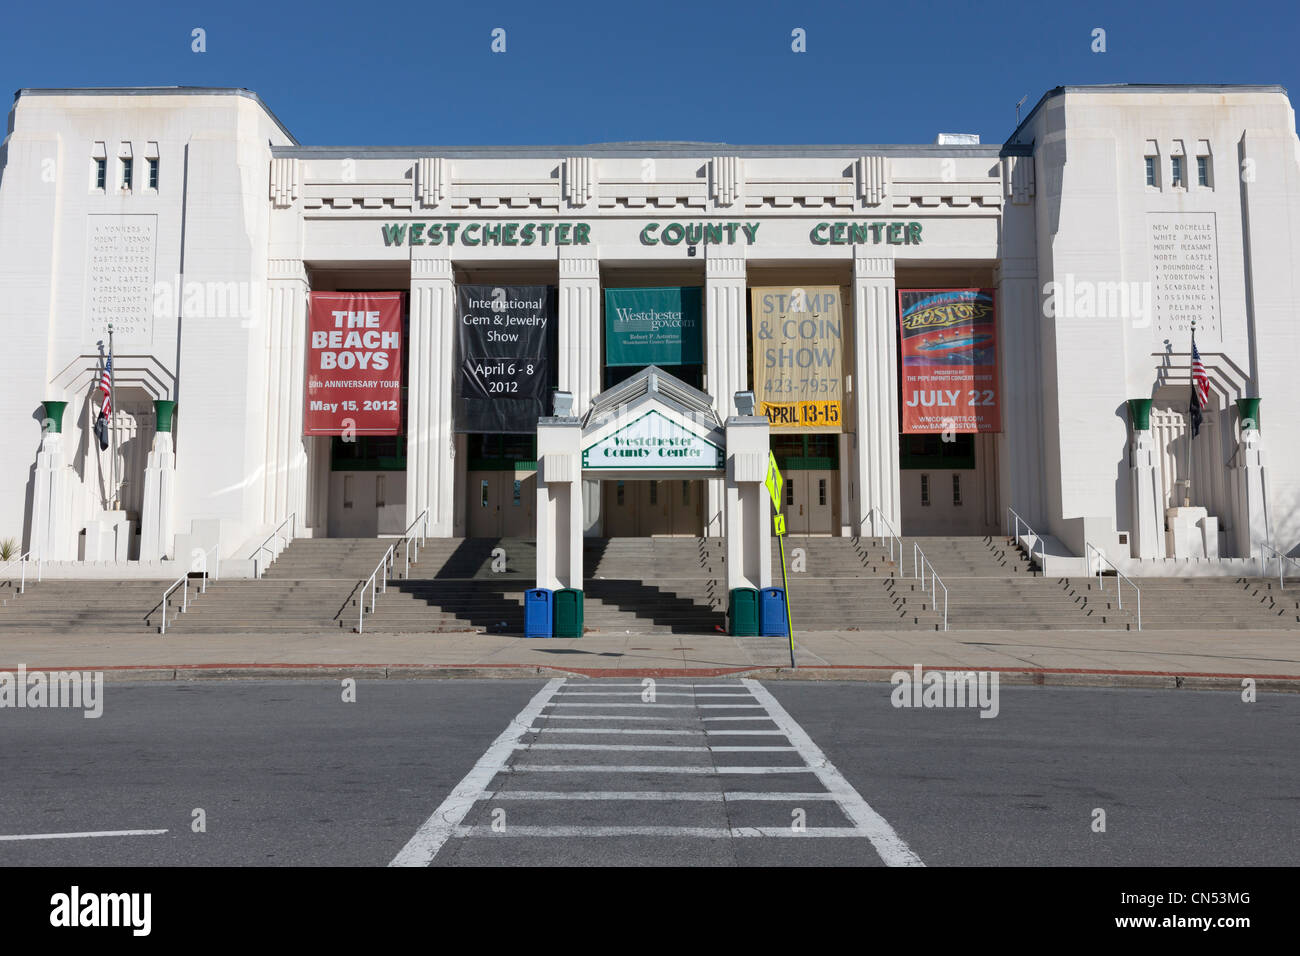 The Westchester County Center in White Plains, New York. Stock Photo